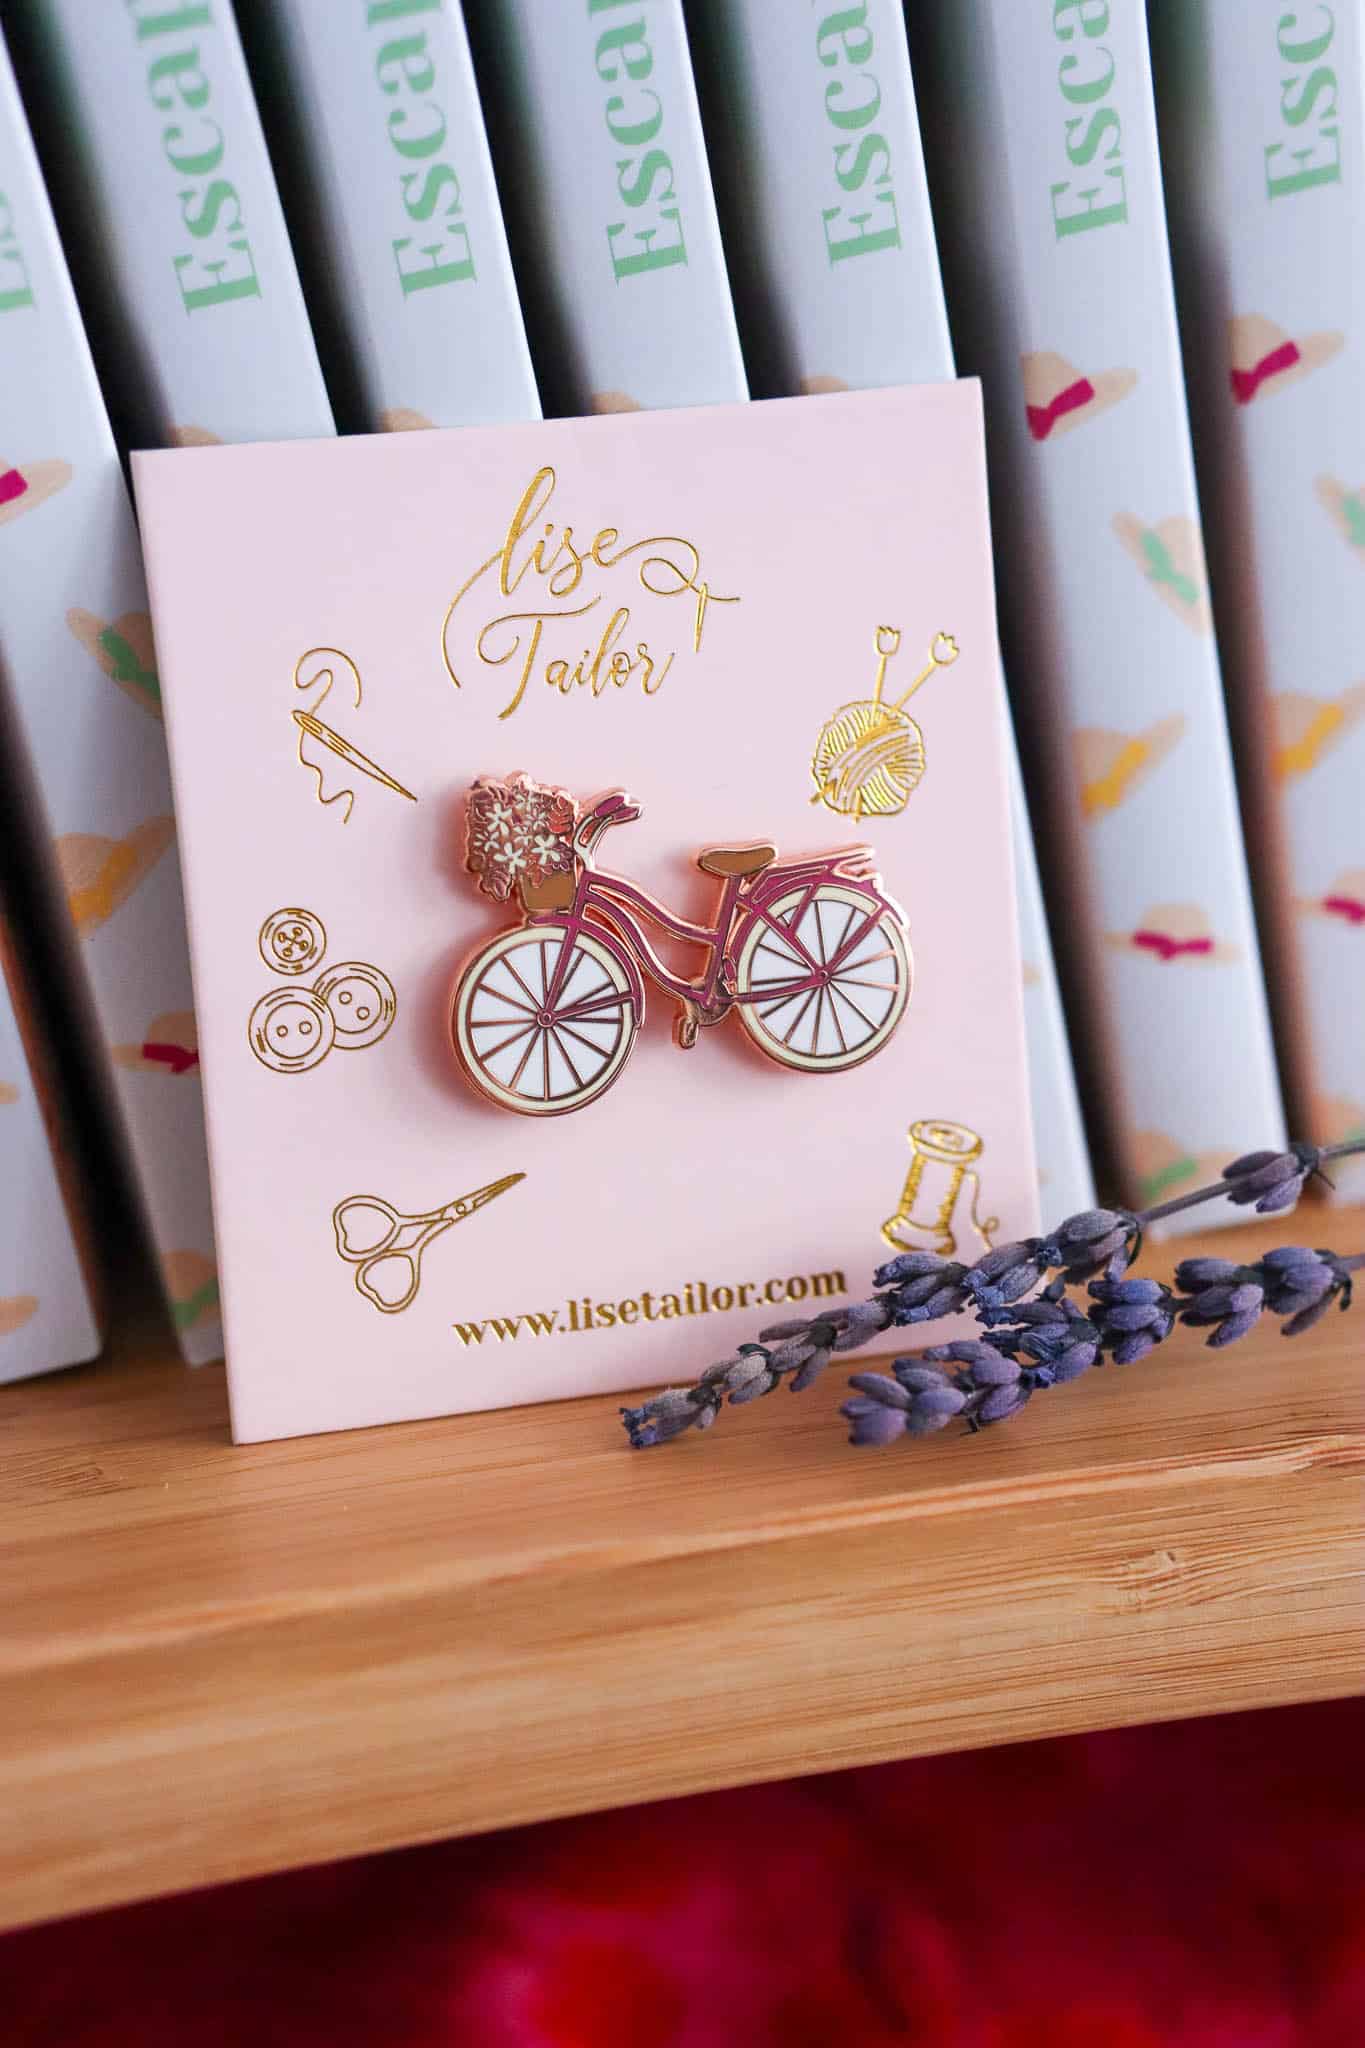 Lise Tailor - Bicycle Pin